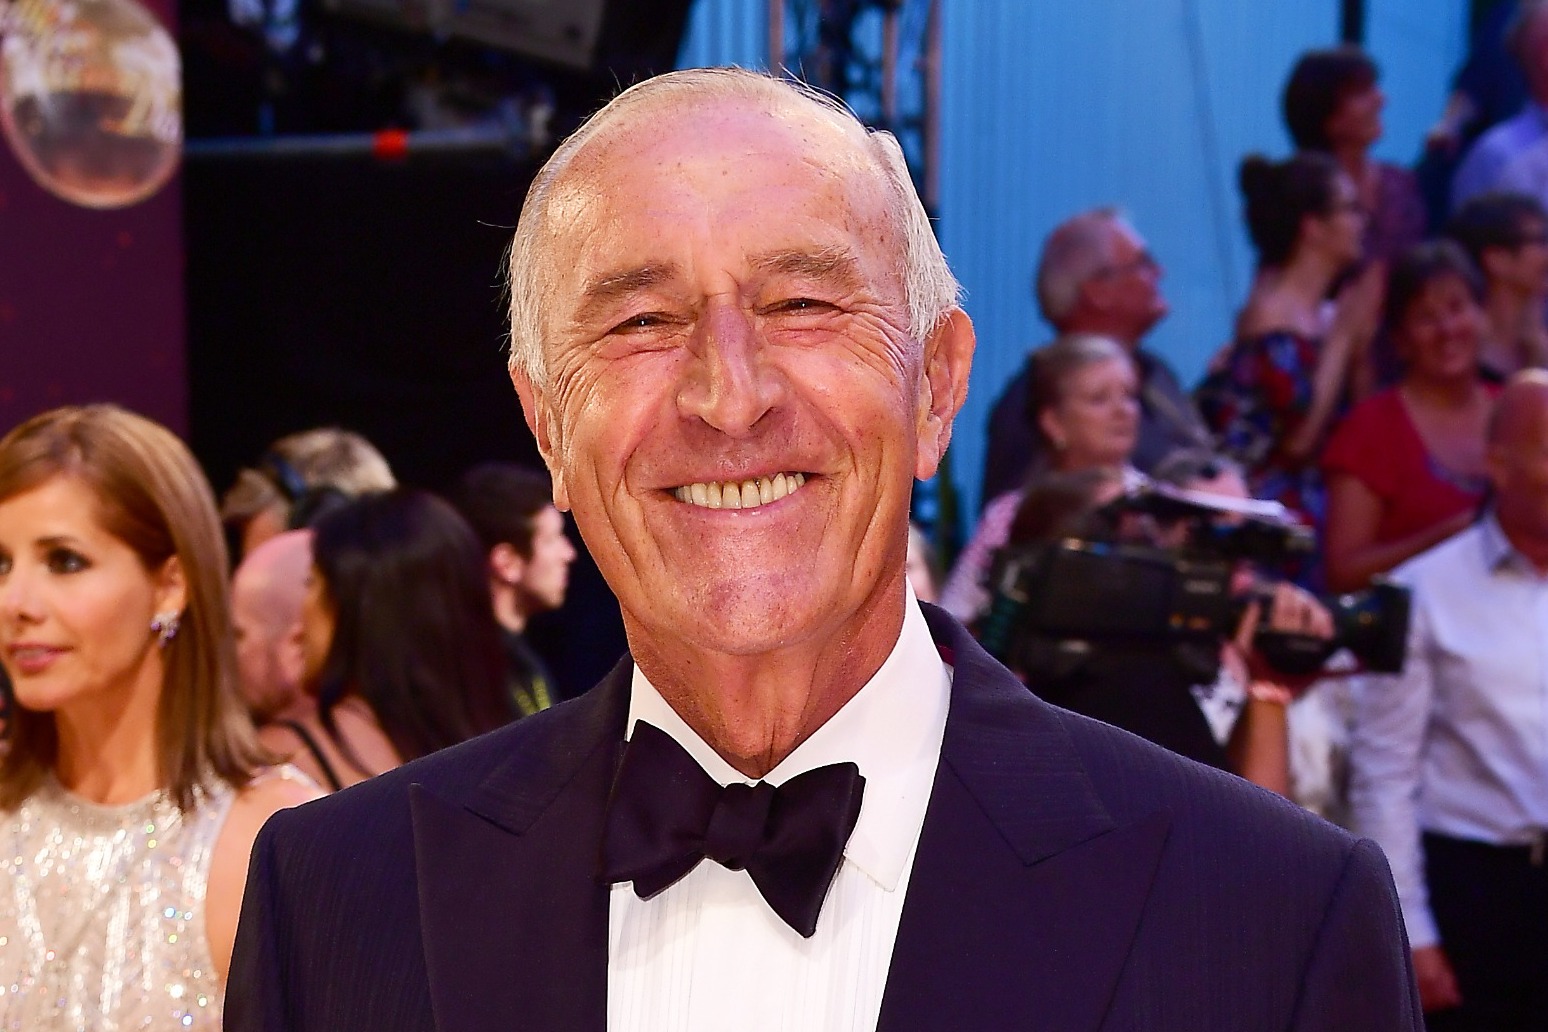 Len Goodman announces retirement from Dancing With The Stars 